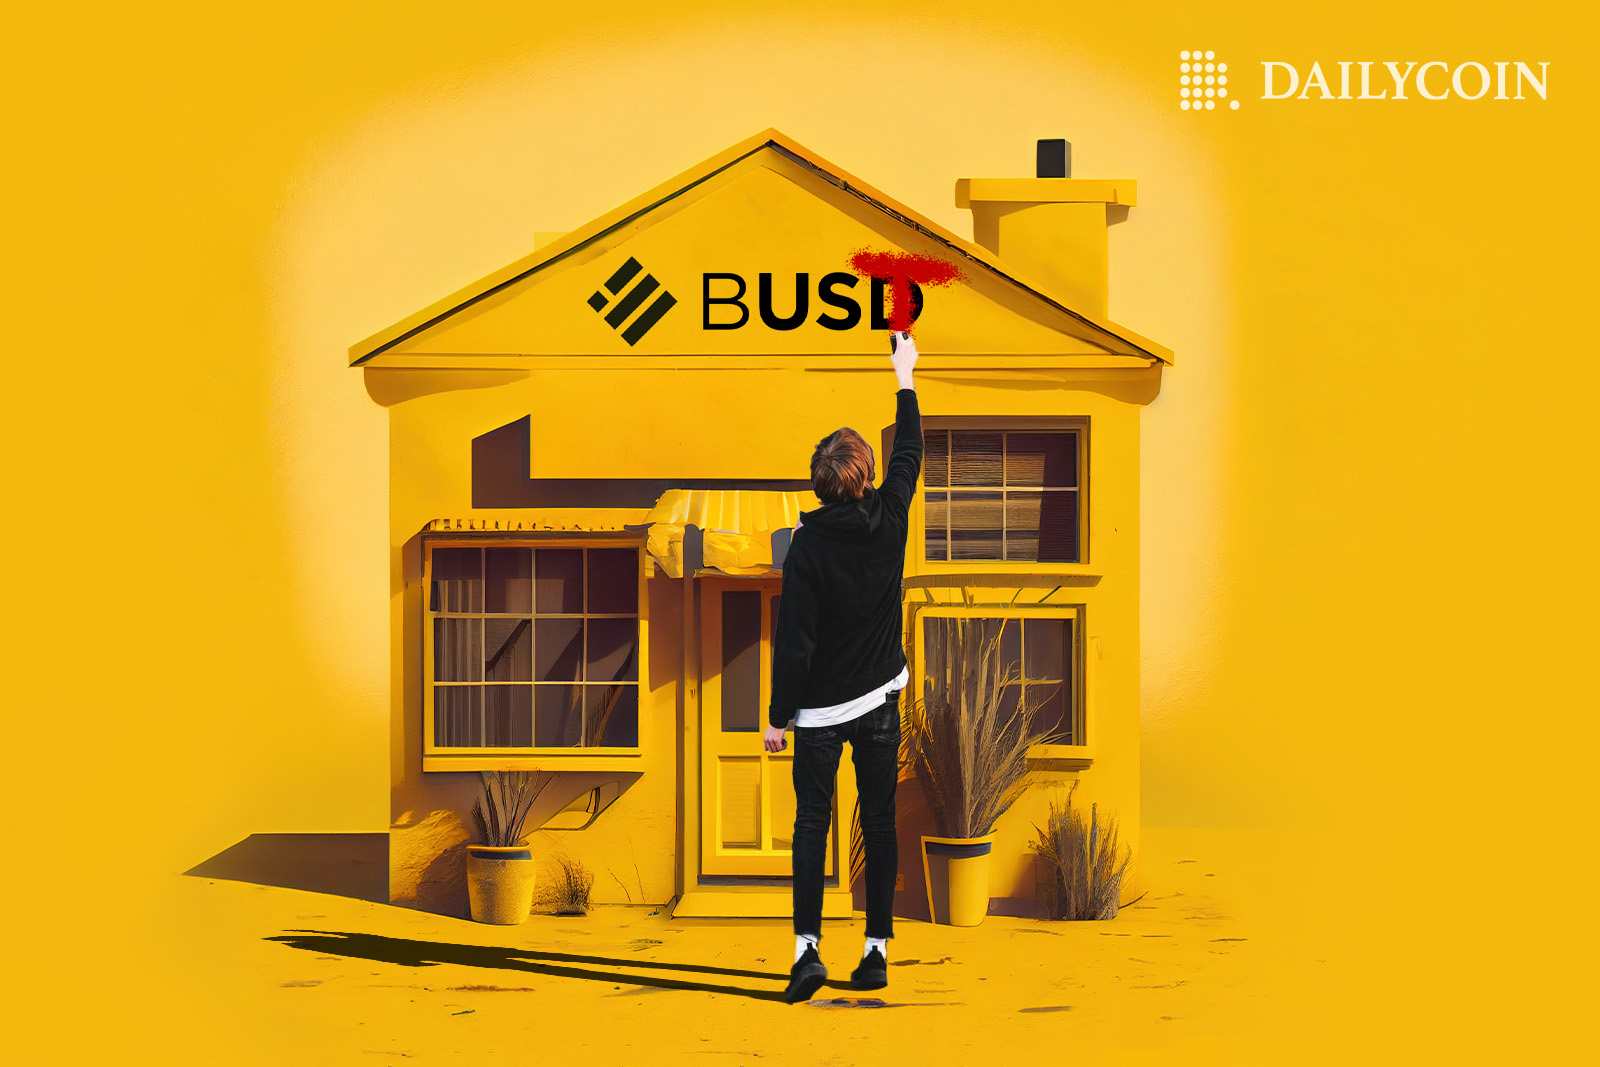 A quaint yellow house with "BUSD" as its named is being painted over with red to read "BUST" by a woman.